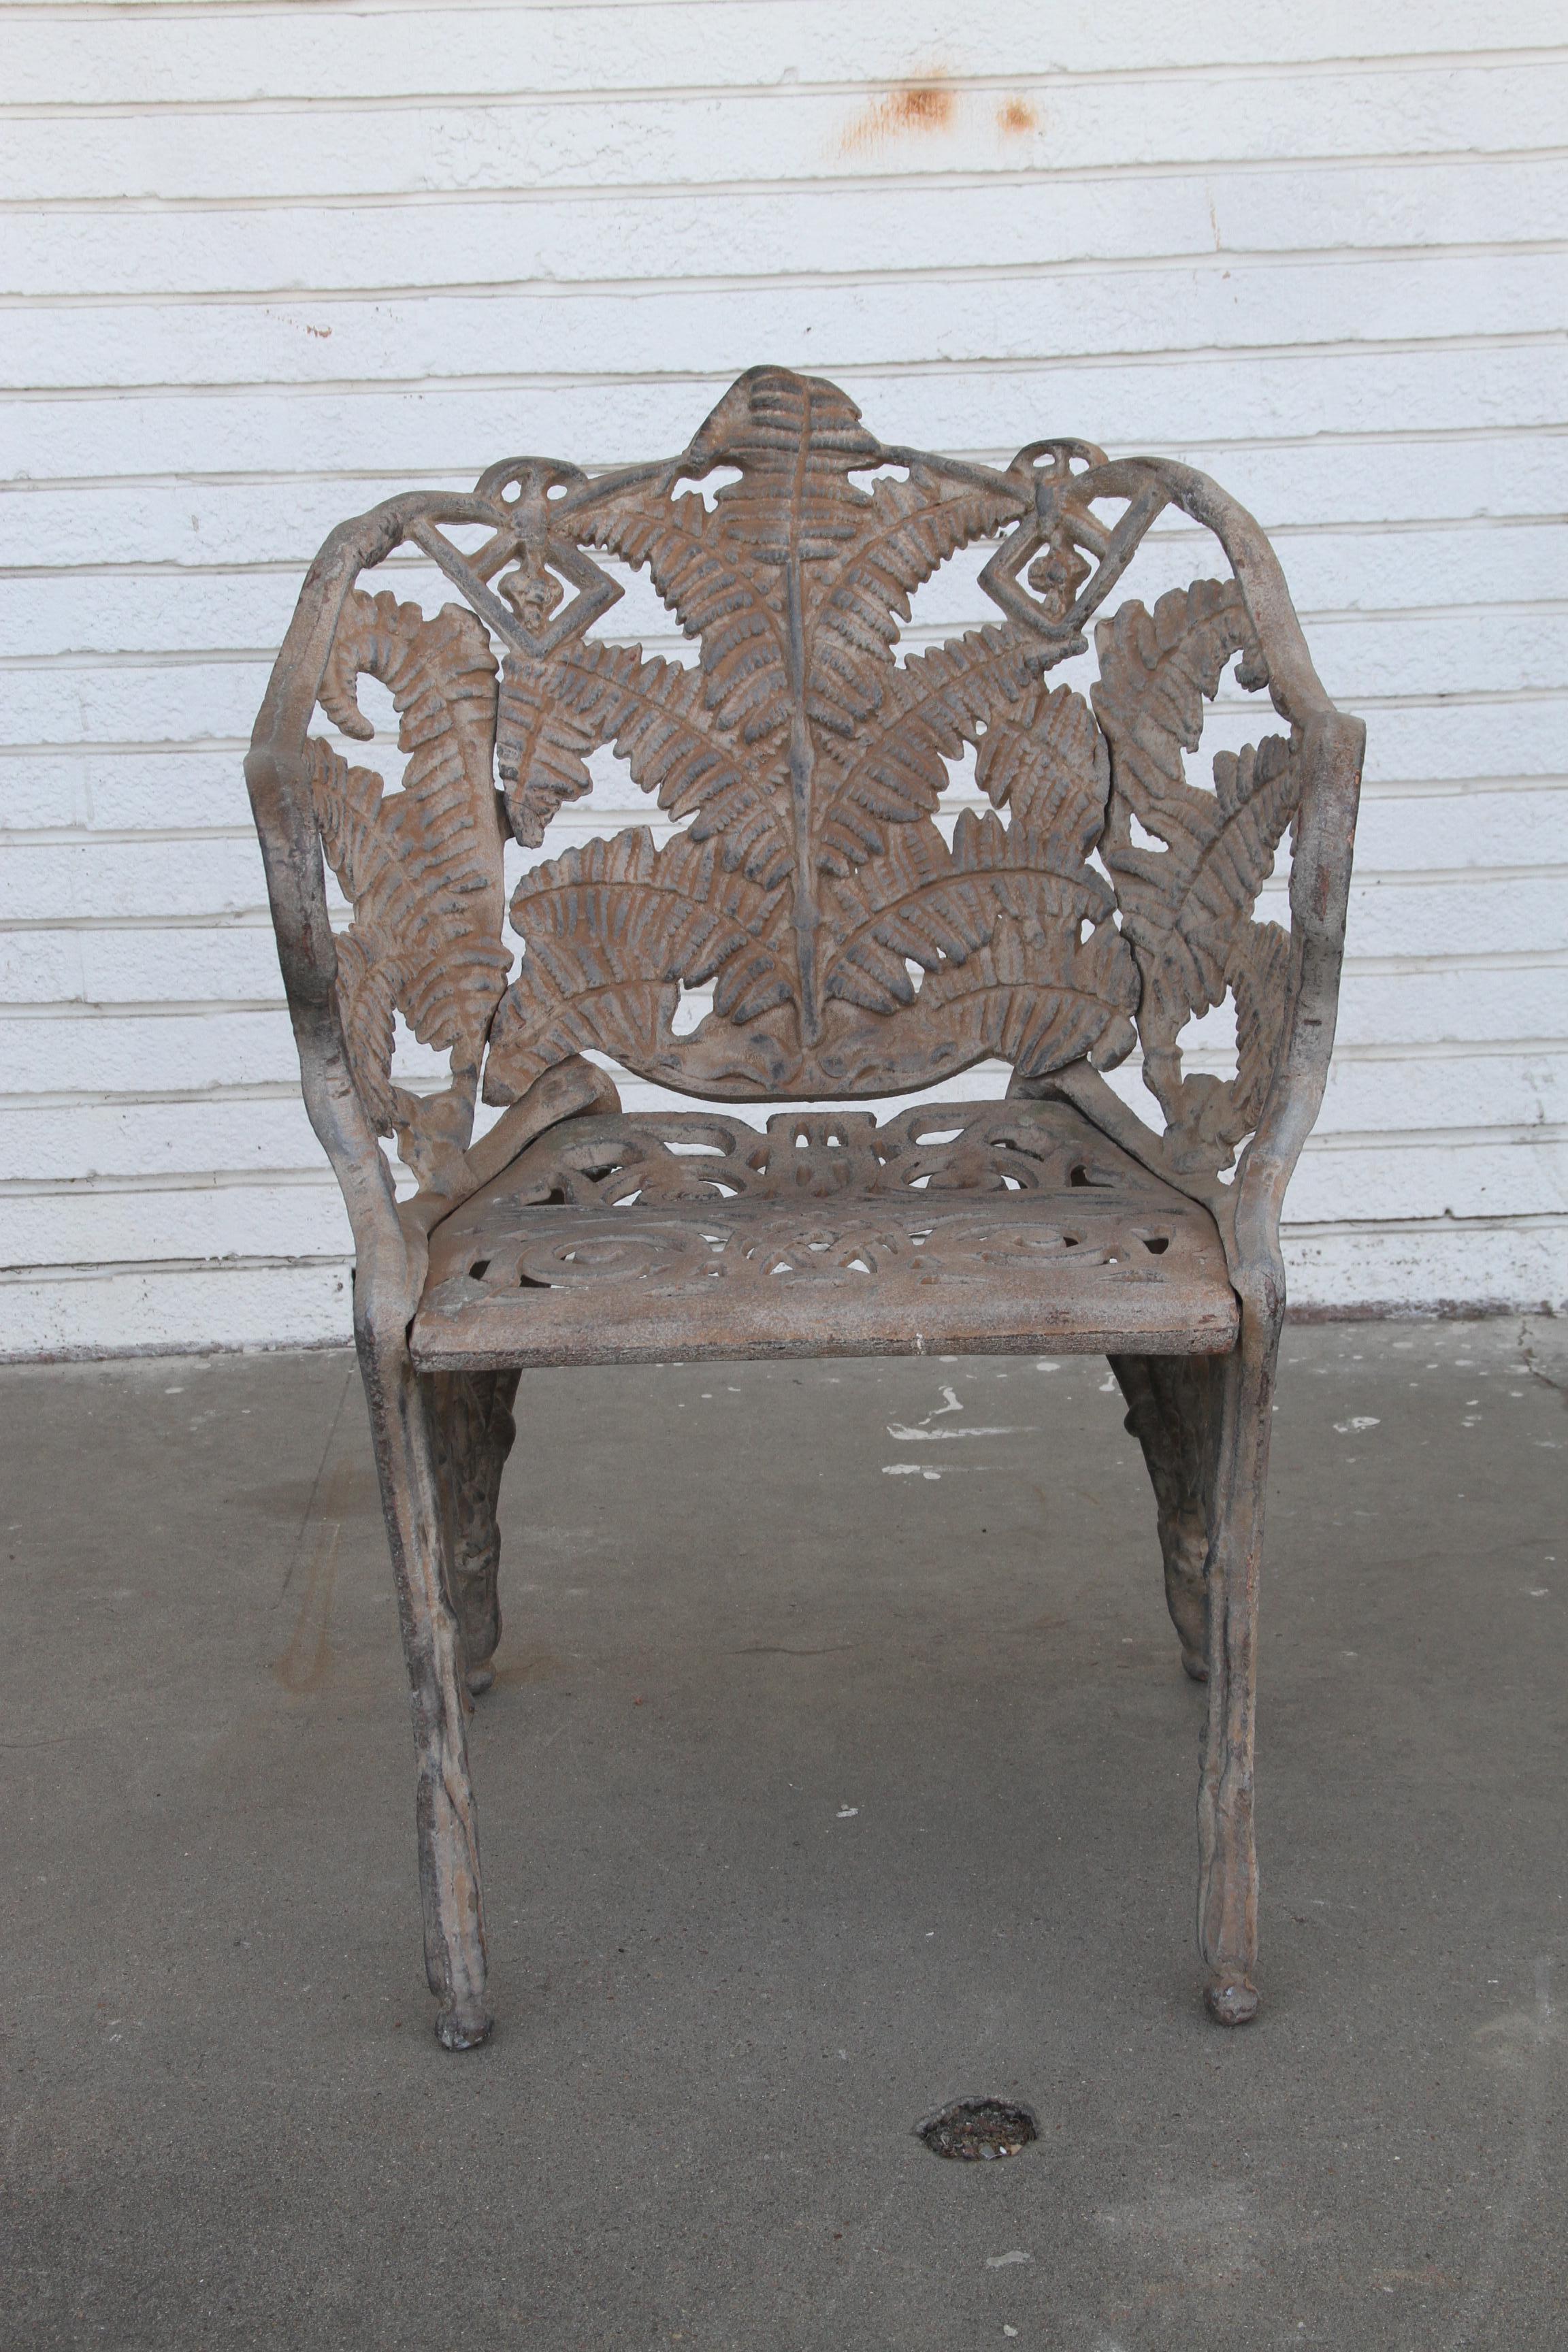 Vintage Victorian Cast Iron Patio Chair


An antique Victorian garden chair in cast iron with fern leaf motif.

See settee also available.


